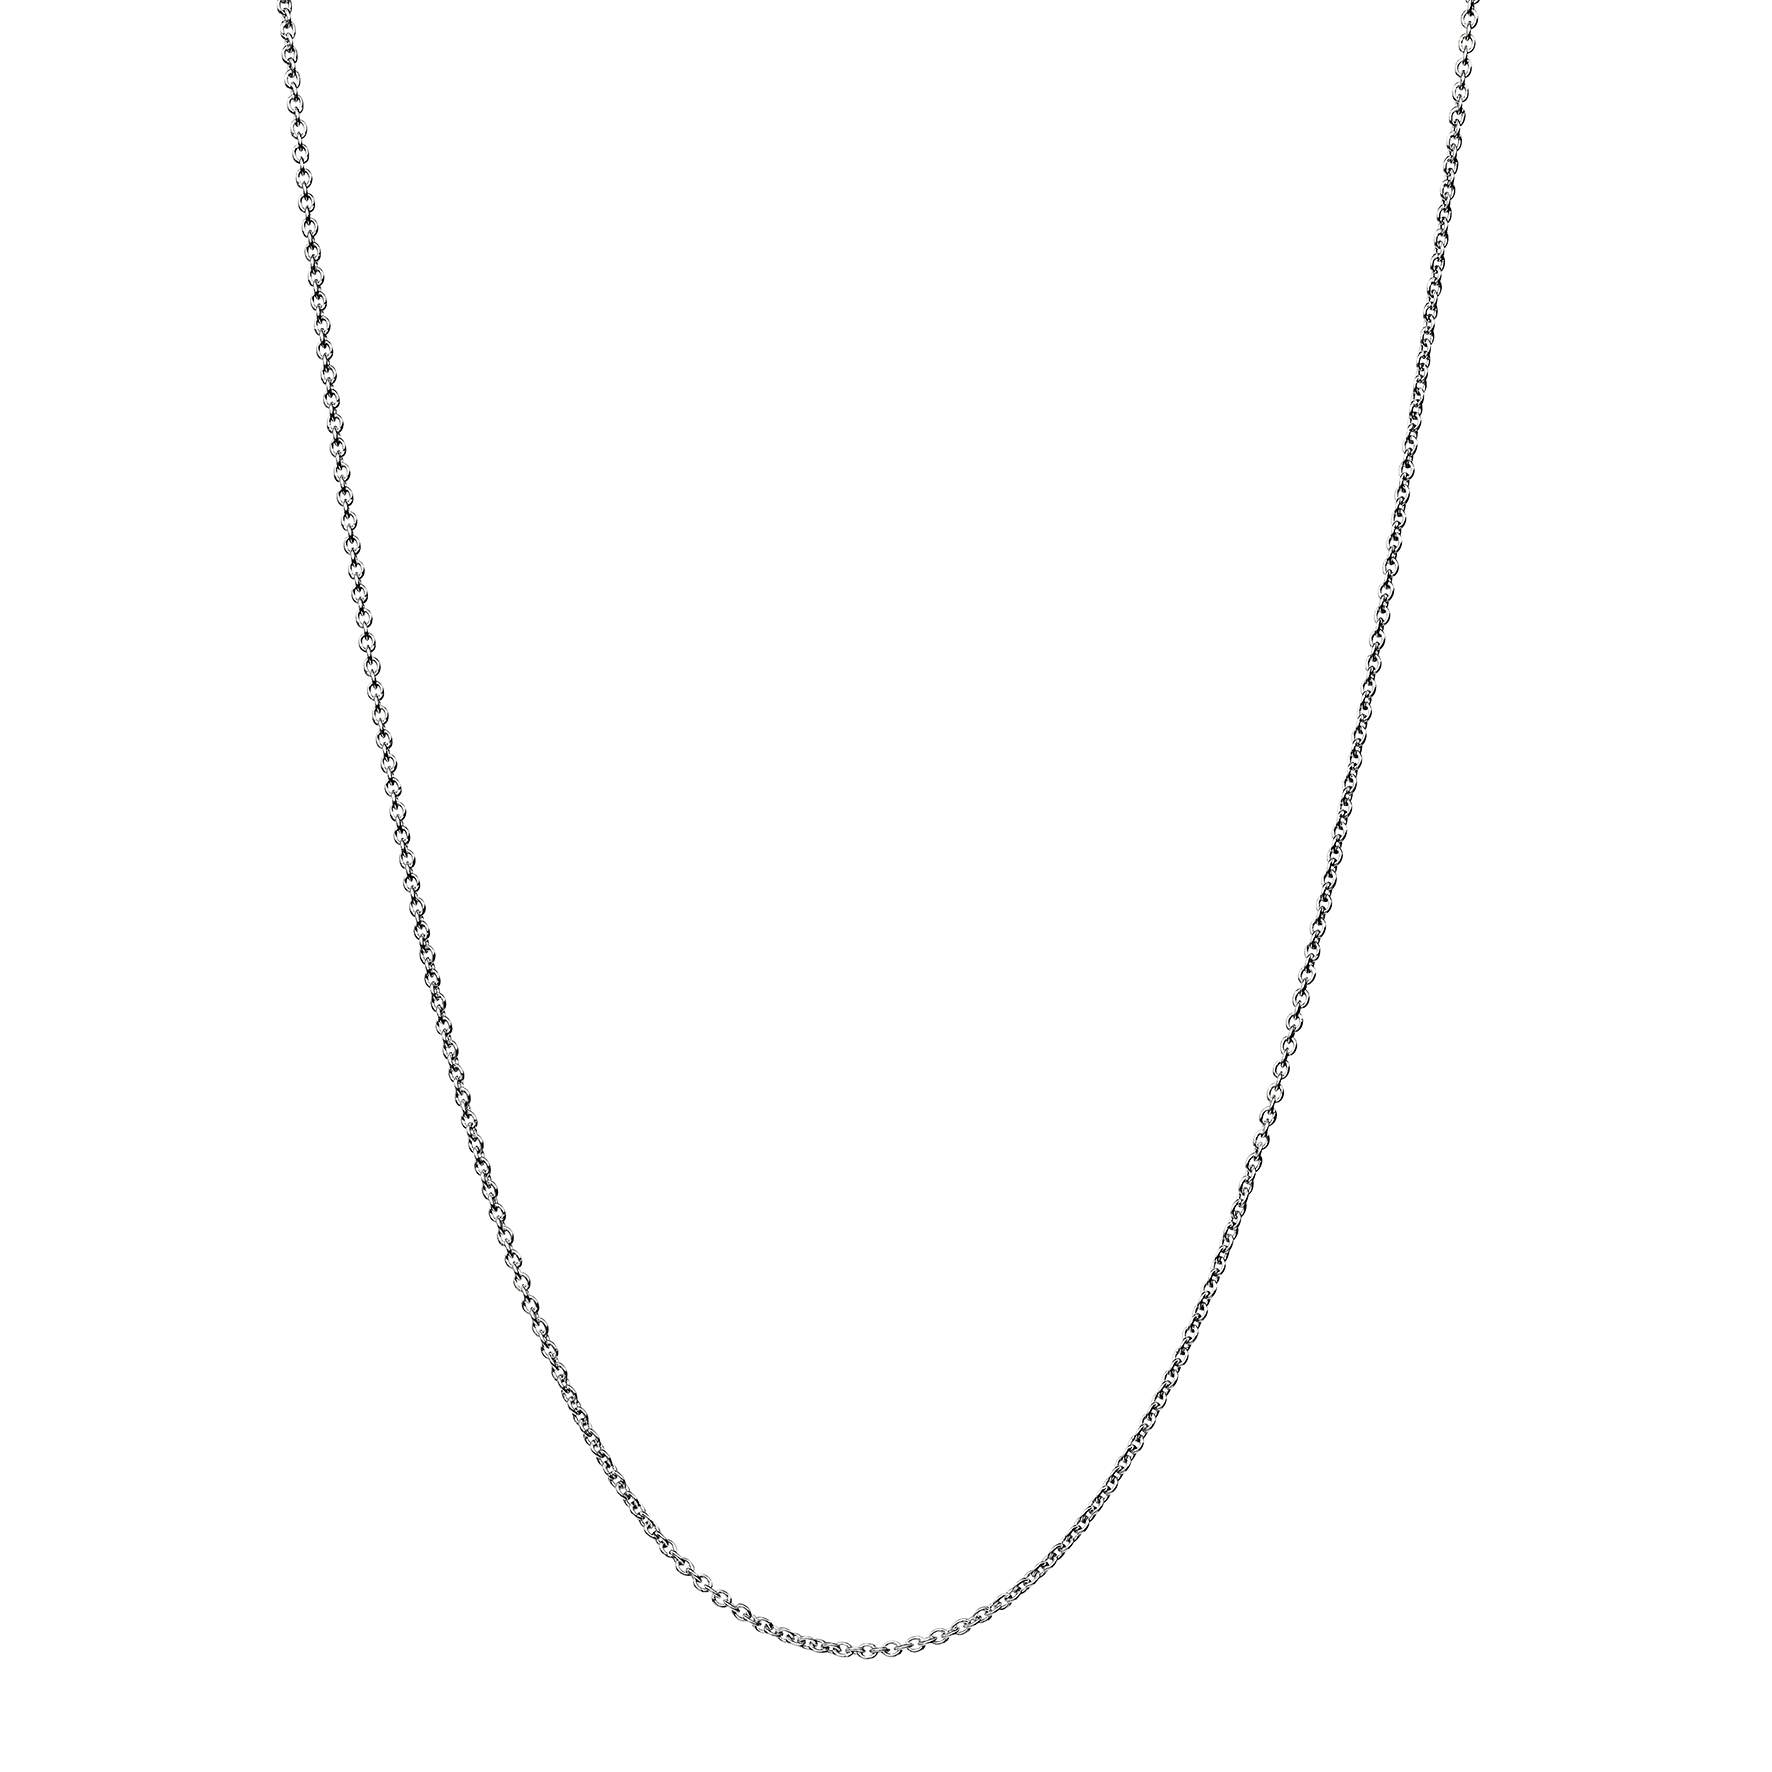 Charlie Grande Necklace from Maanesten in Silver Sterling 925